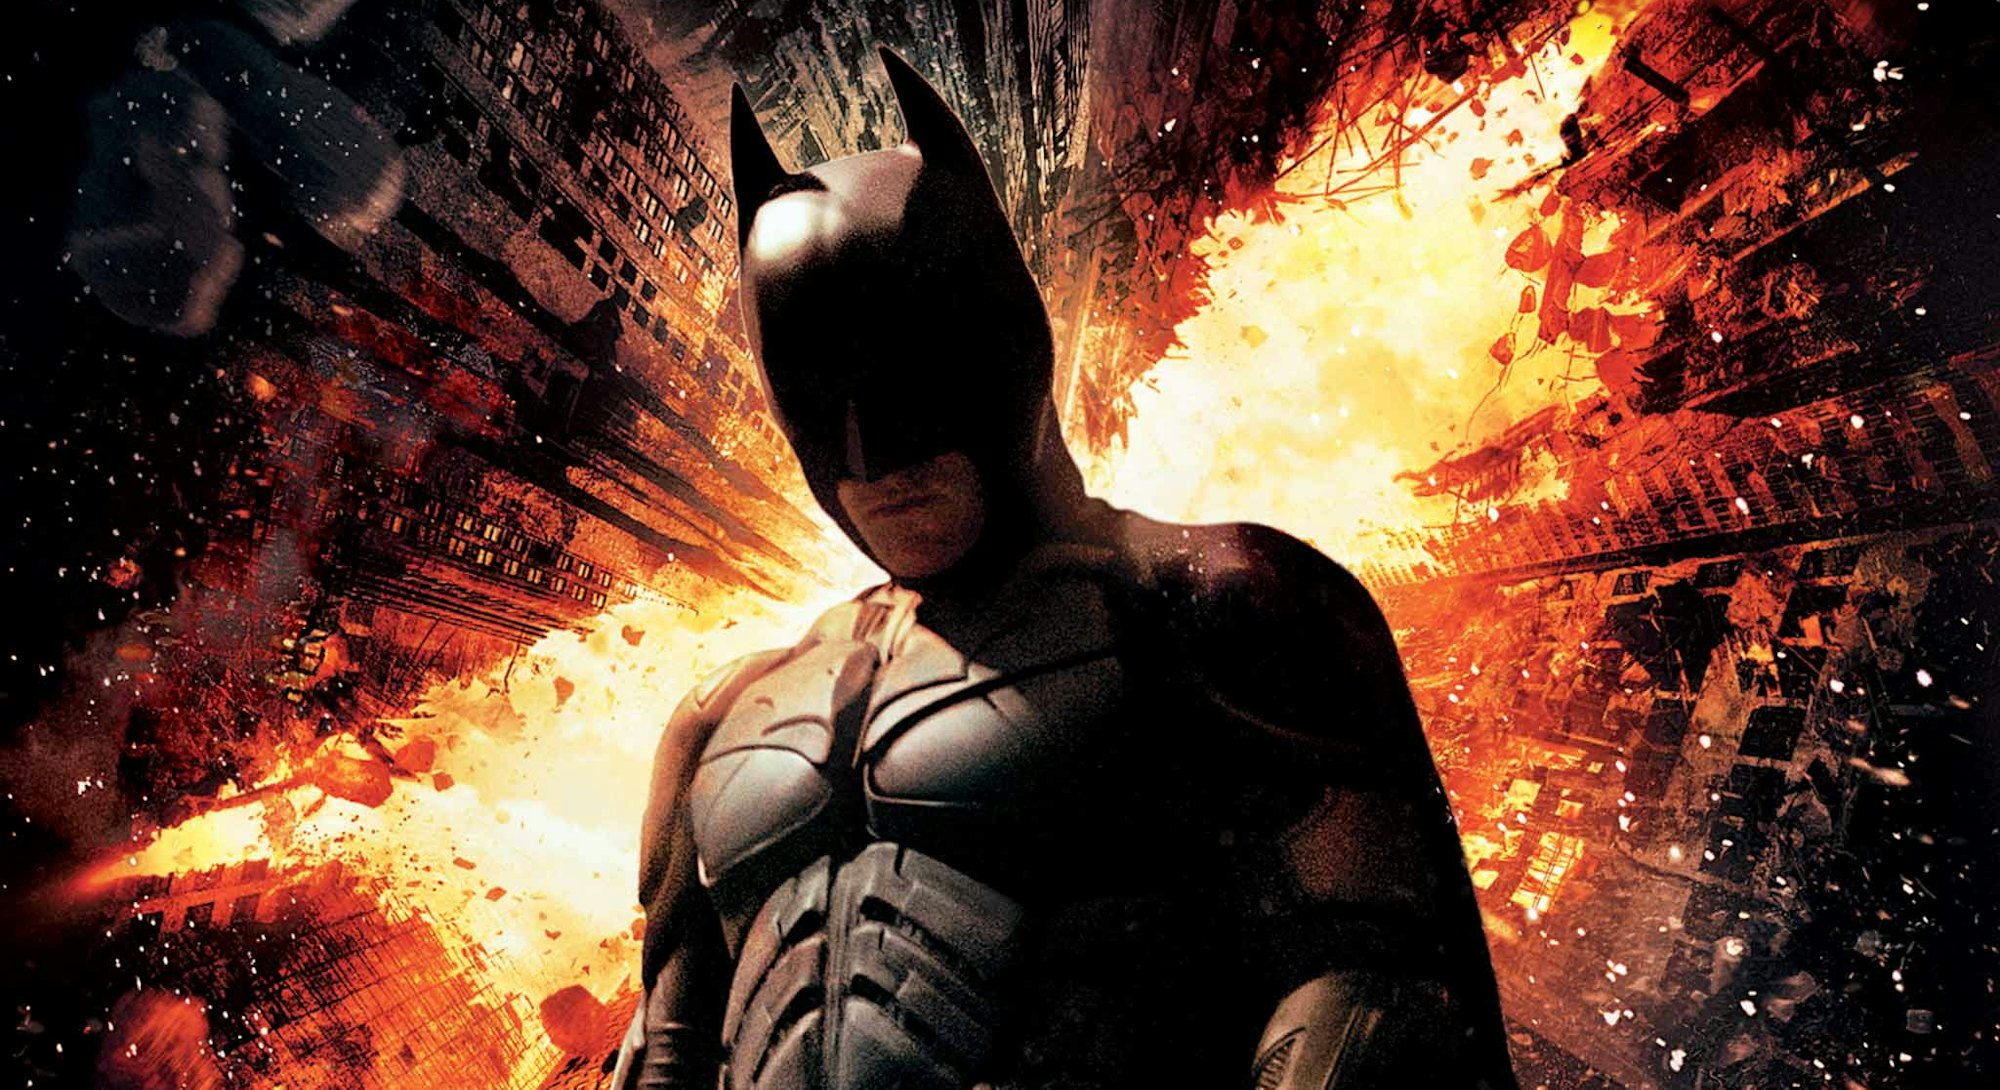 poster image from The Dark Knight Rises